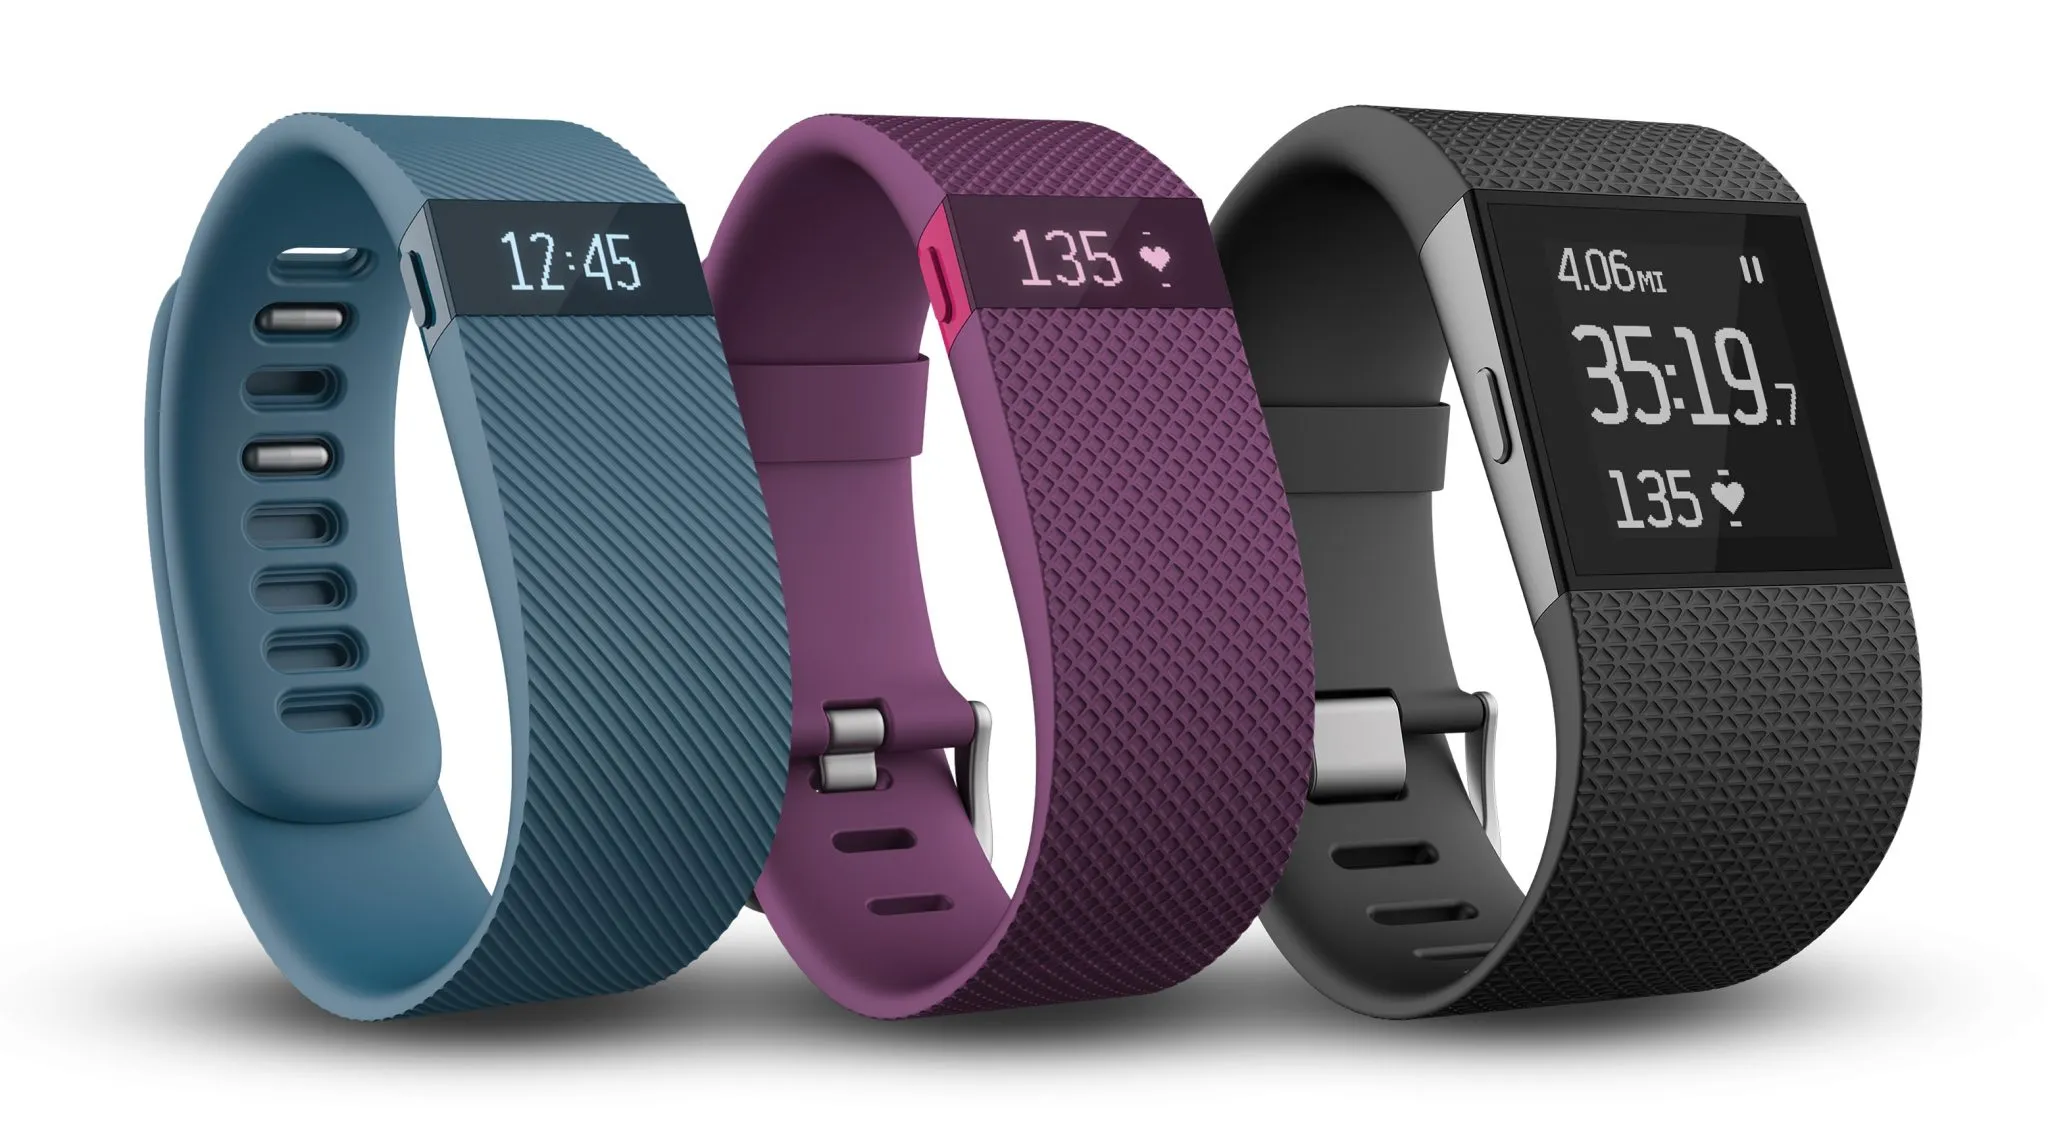 Is Fitbit being discontinued?